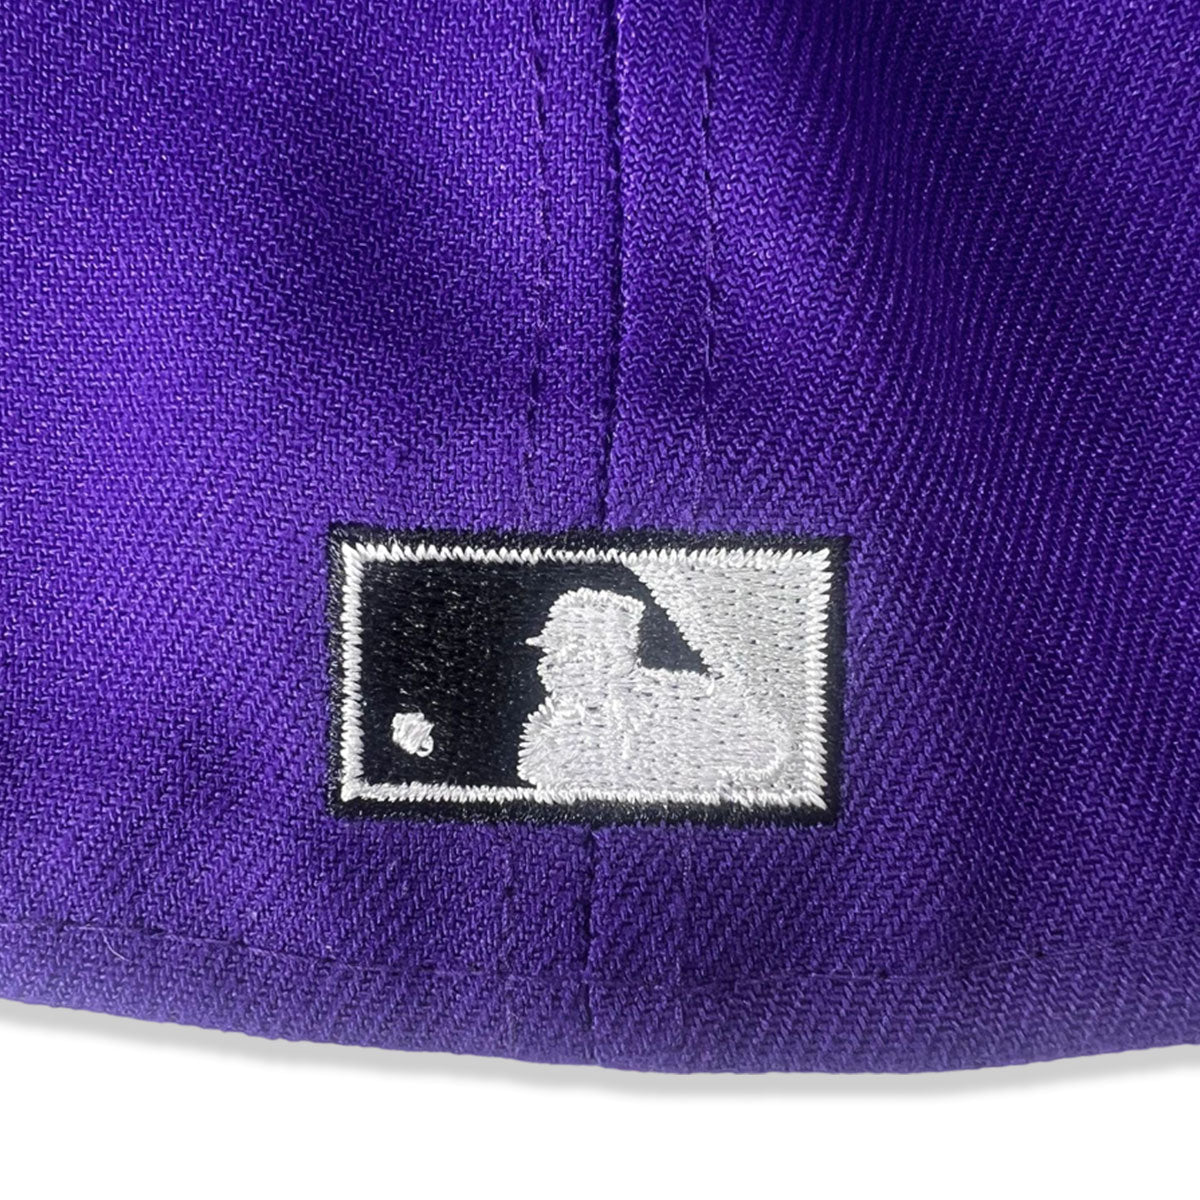 New Era Colorado Rockies 25th Anniversary 1993-2018 Patch 59Fifty Fitted